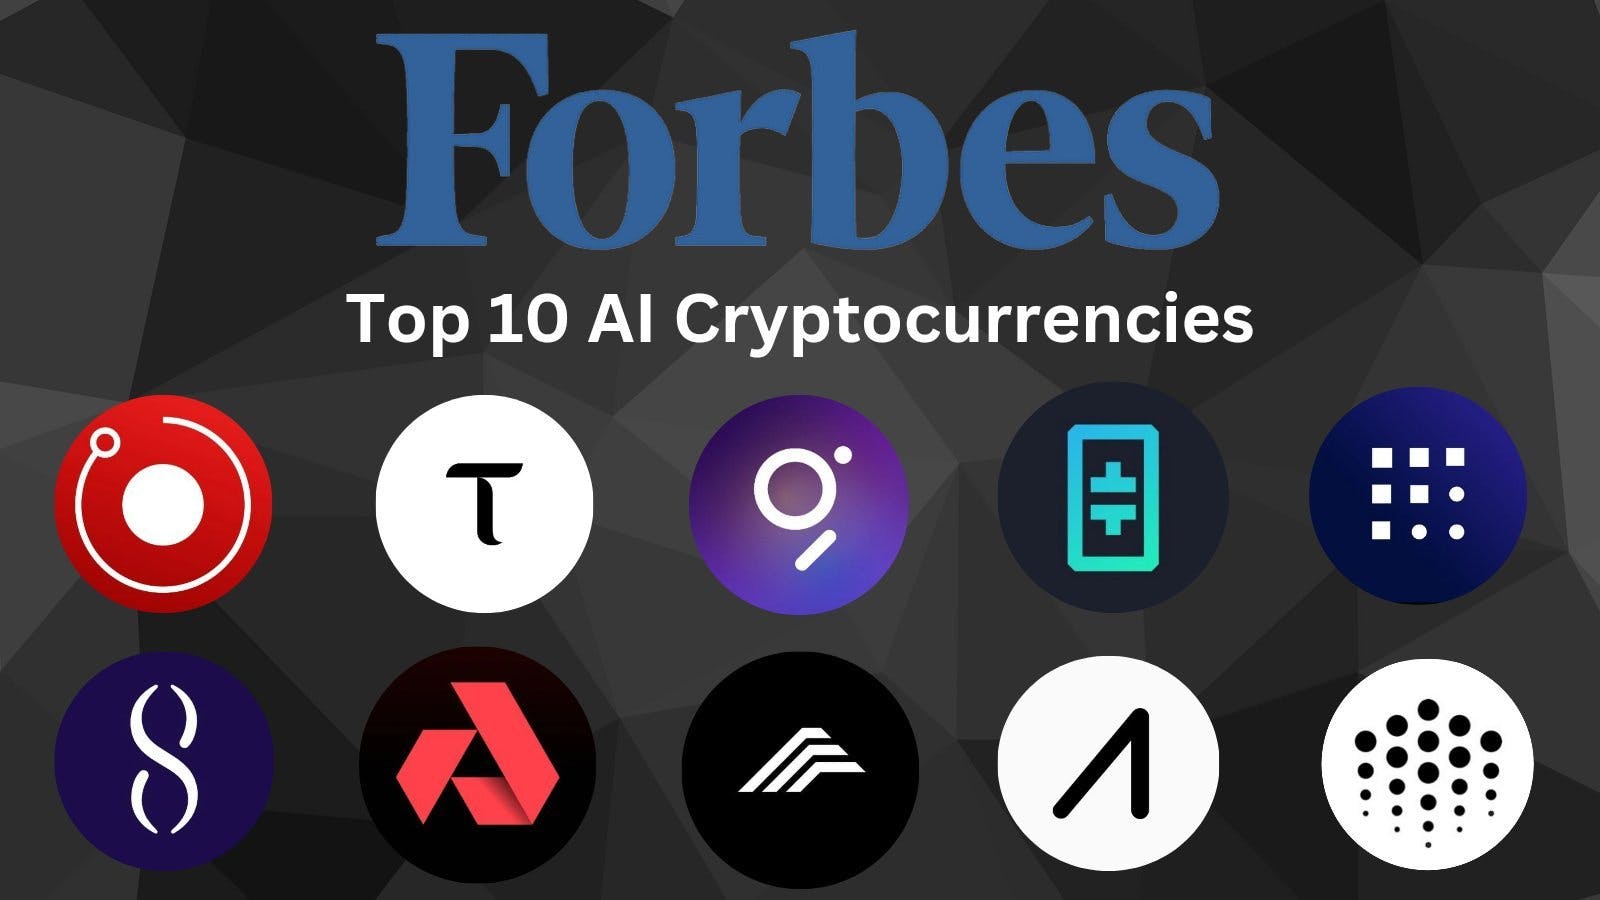 OCT Opinion: Forbes top 10 AI projects image